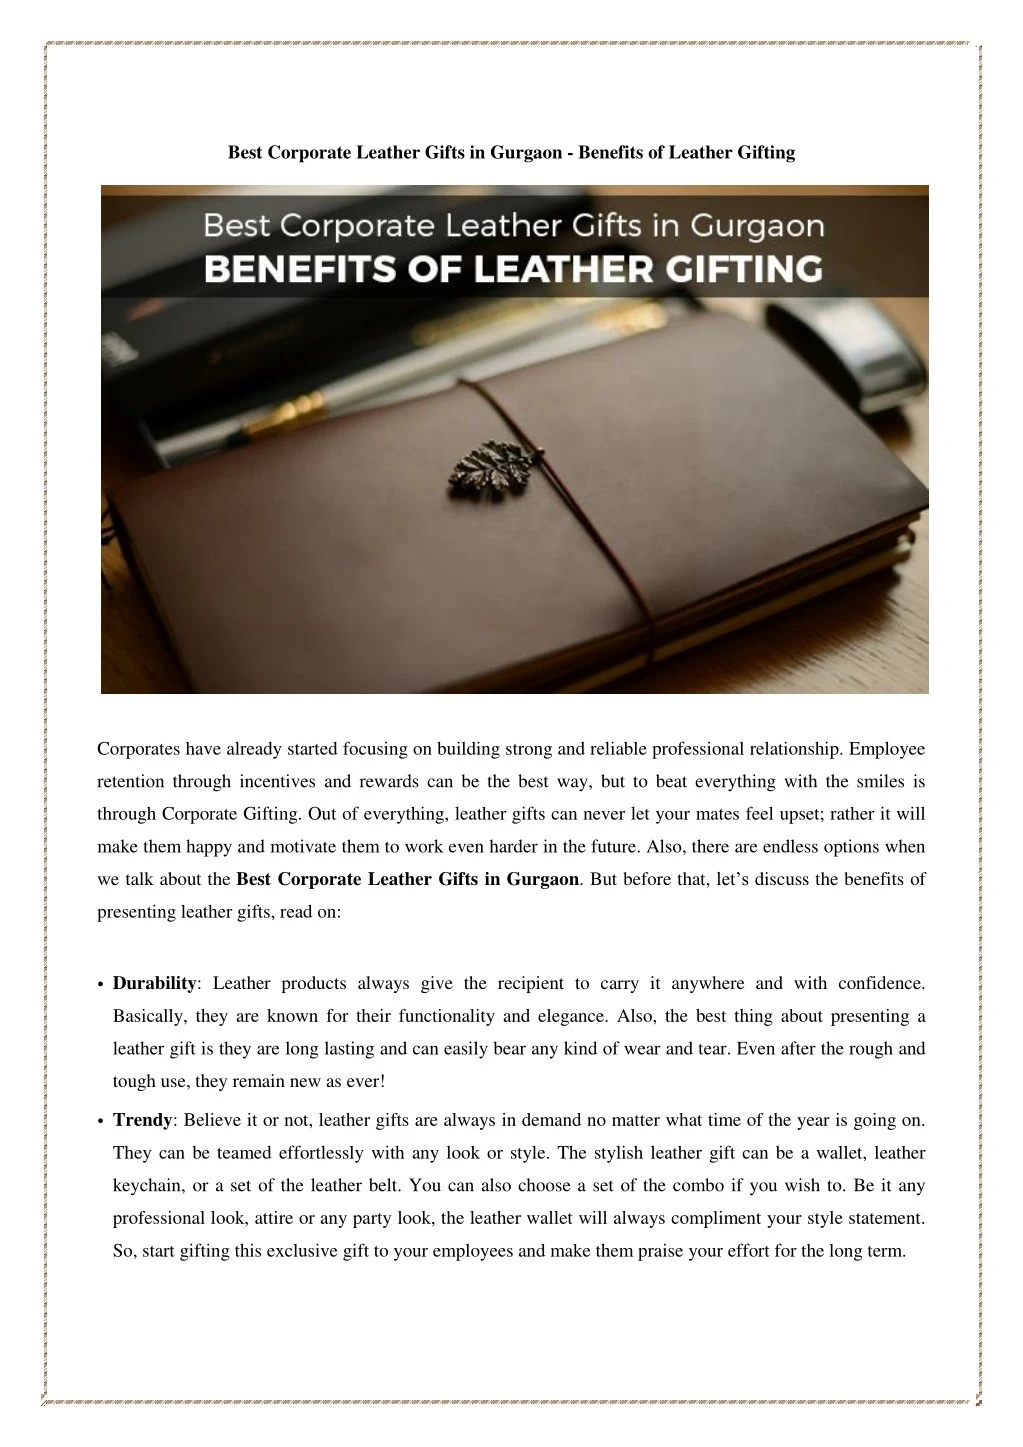 best corporate leather gifts in gurgaon benefits